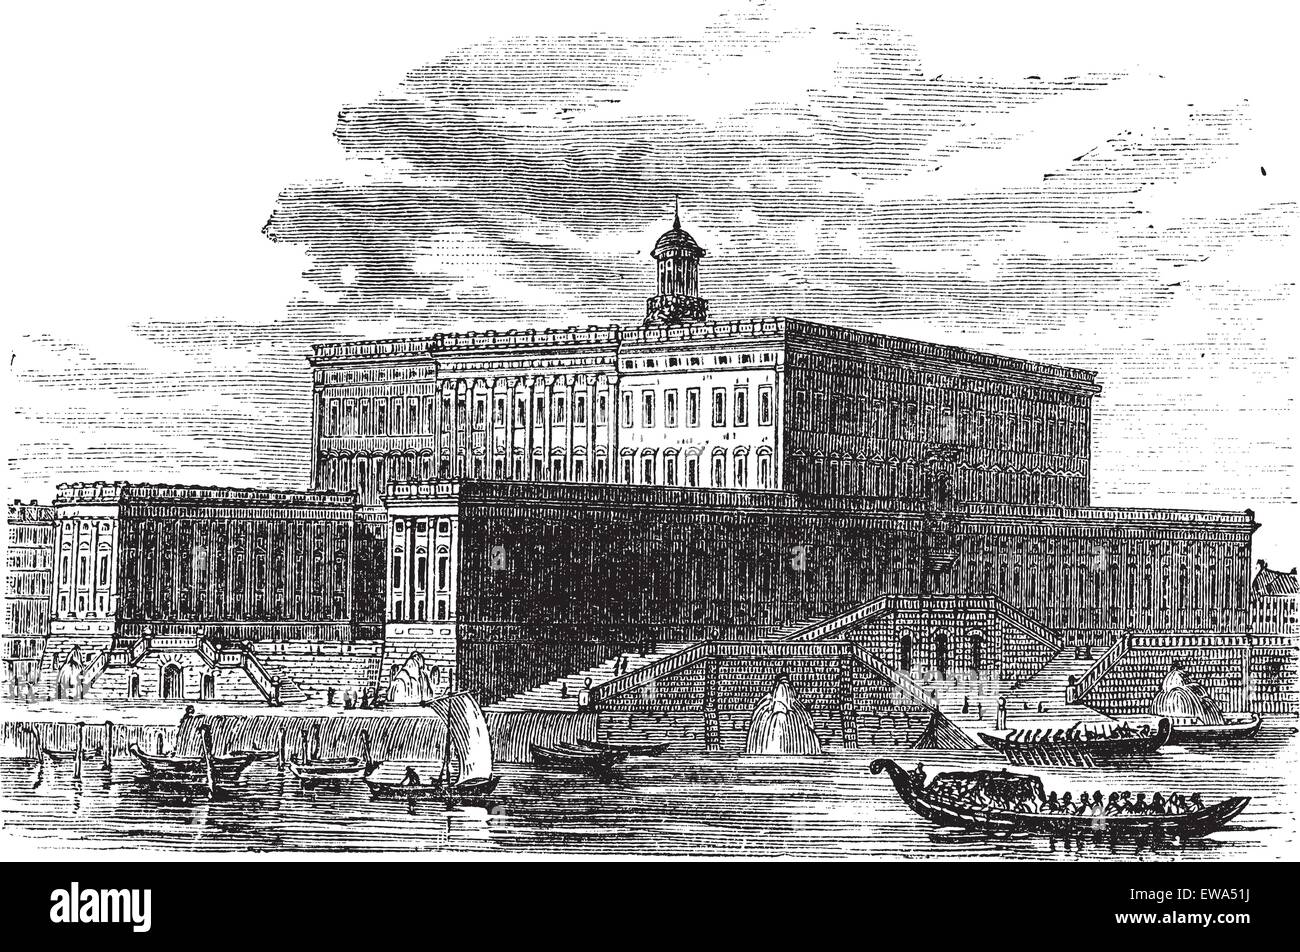 Stockholm Palace in Stadsholmen, Sweden, during the 1890s, vintage engraving. Old engraved illustration of Stockholm Palace with running boats in front. Stock Vector